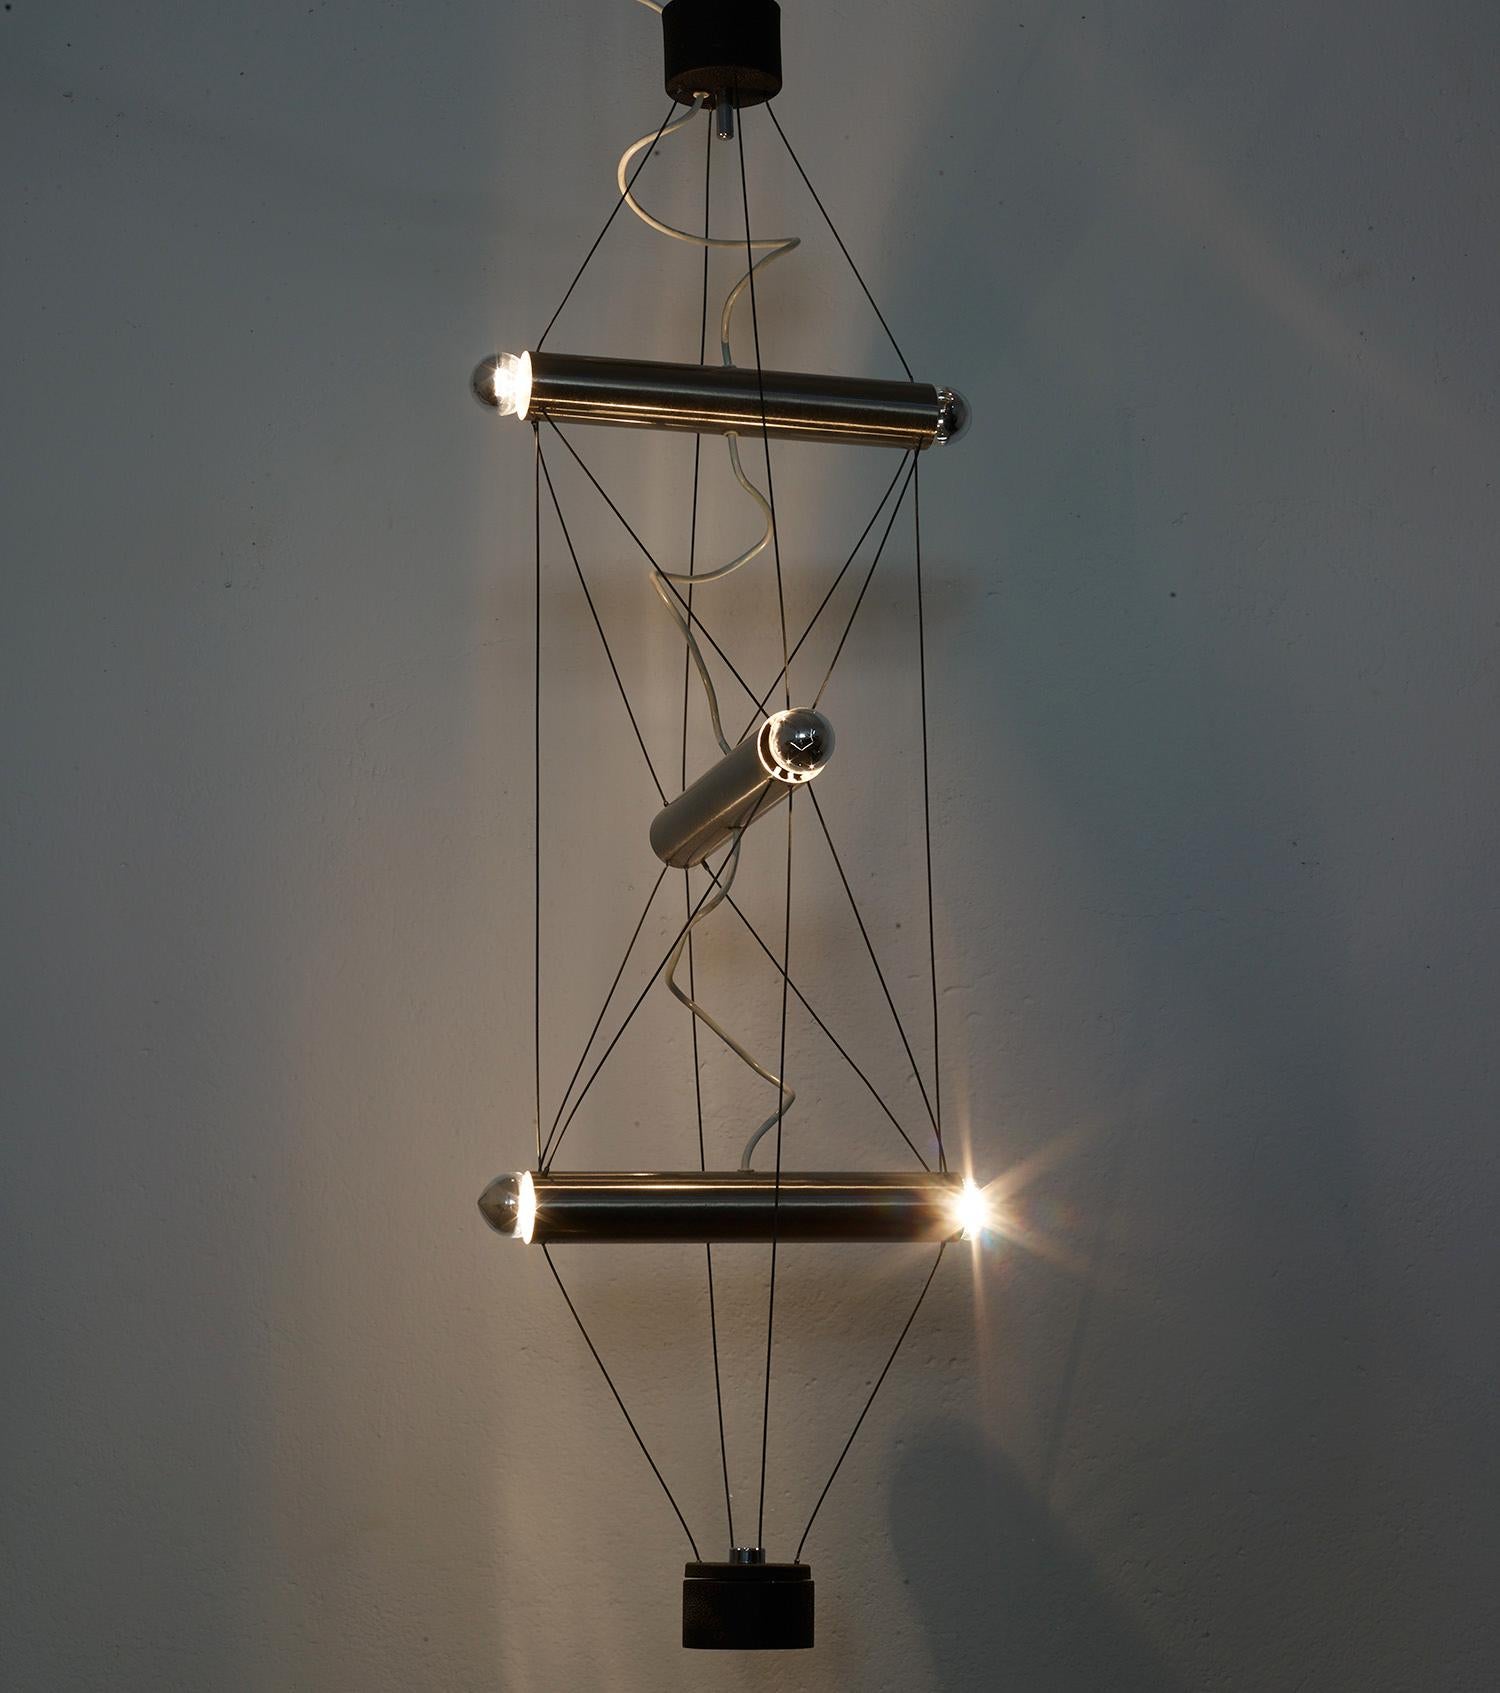 Architectural metal and steel wire suspension by Lumi, Italy, 1970

Lumi was a well respected and renown Italian editor of lighting designs from Oscar Torlasco among others.

The design of this great suspension bears the mark of the radical